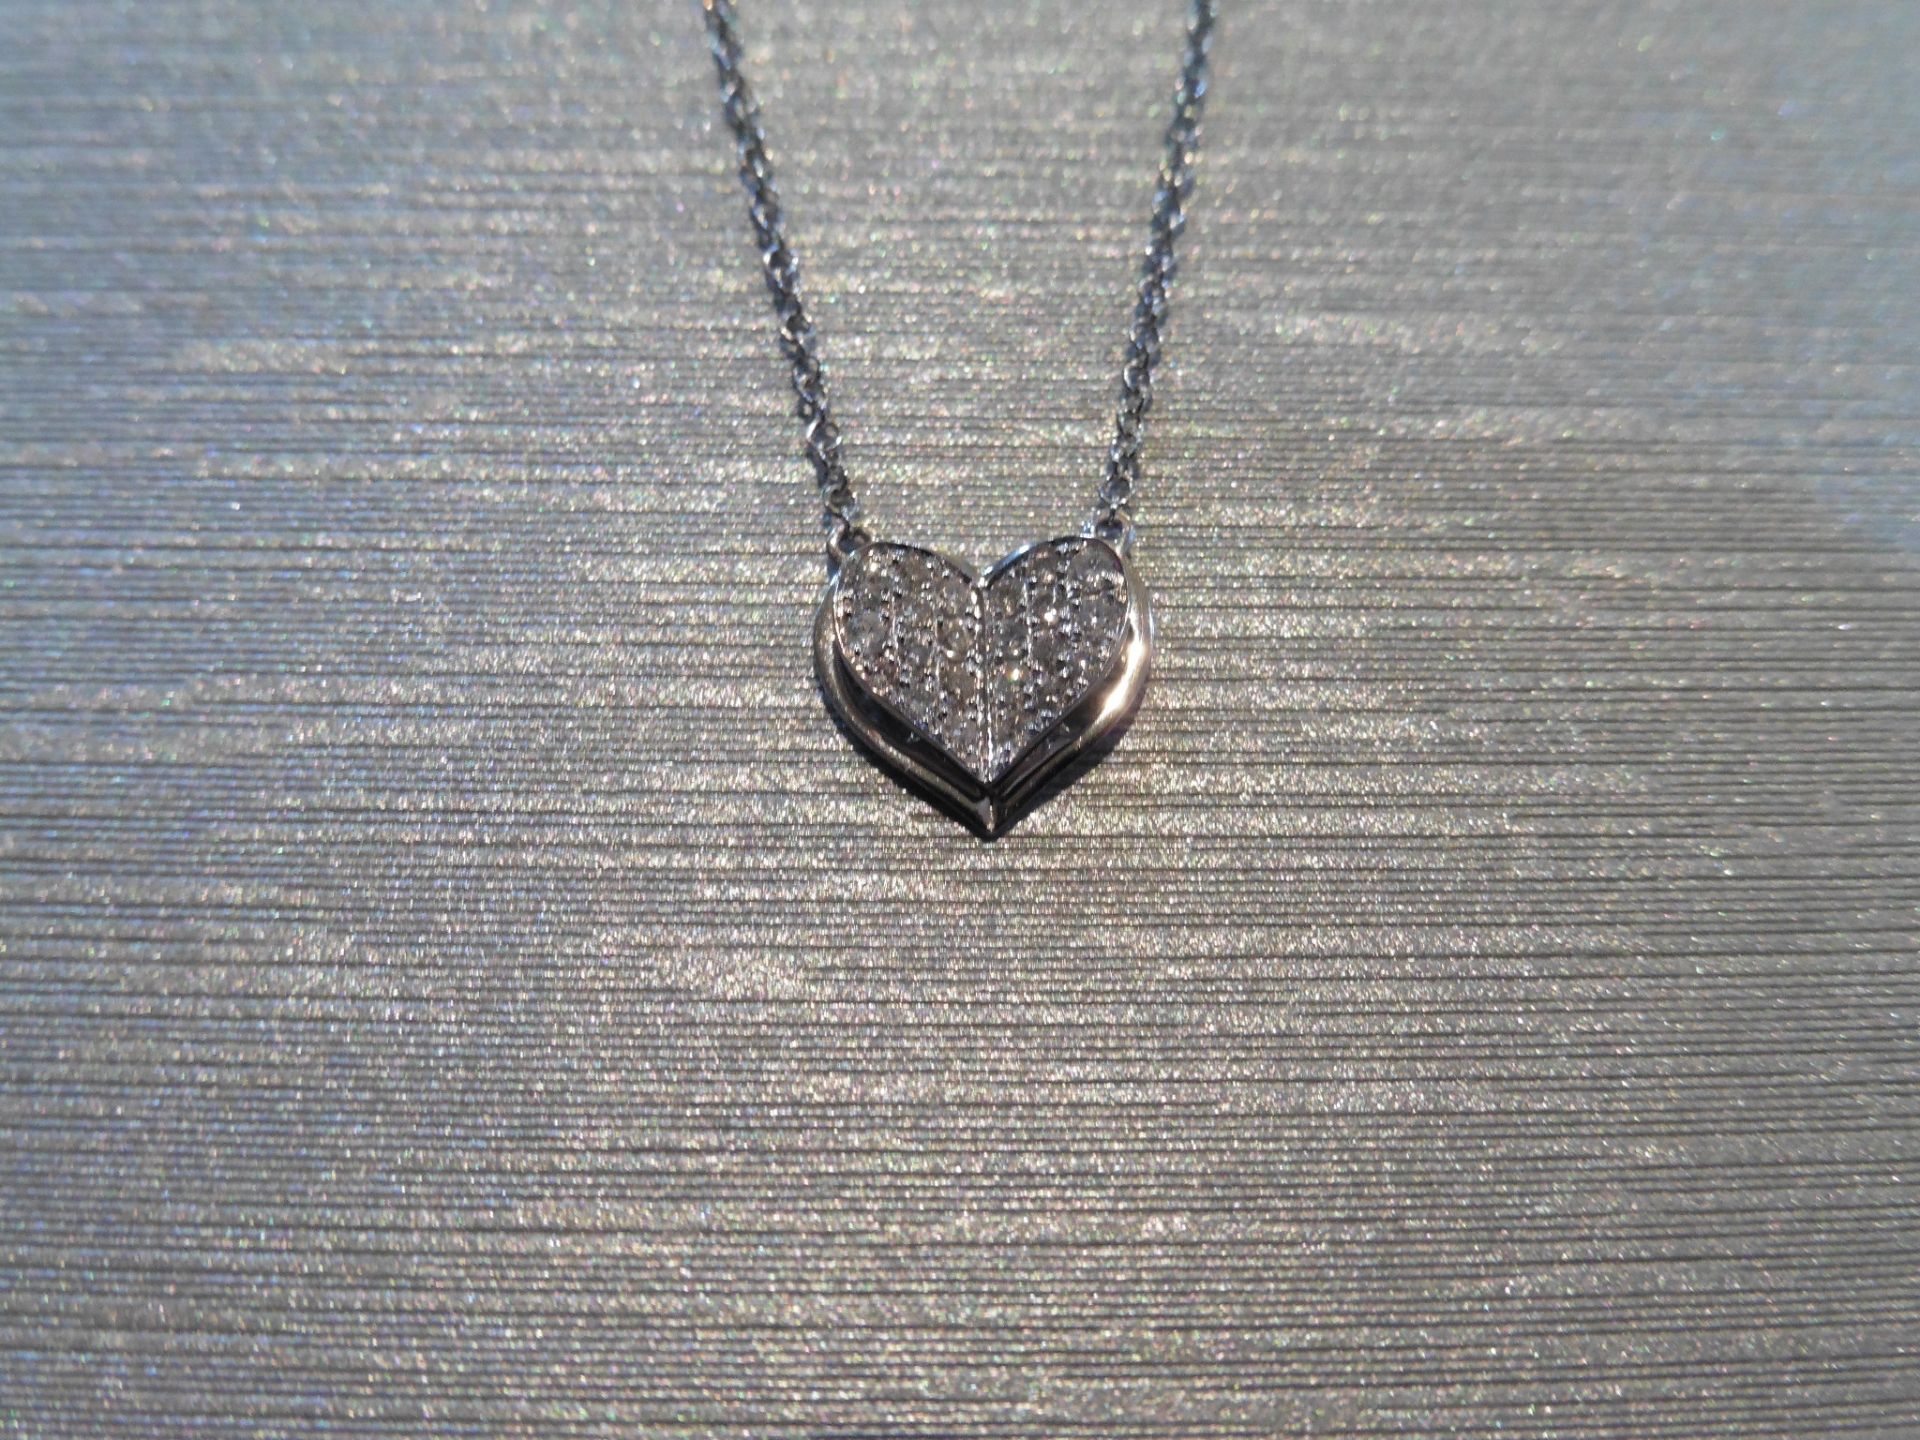 Brand new 18ct white gold diamond set heart pendant and chain. Micro set with tiny brilliant cut